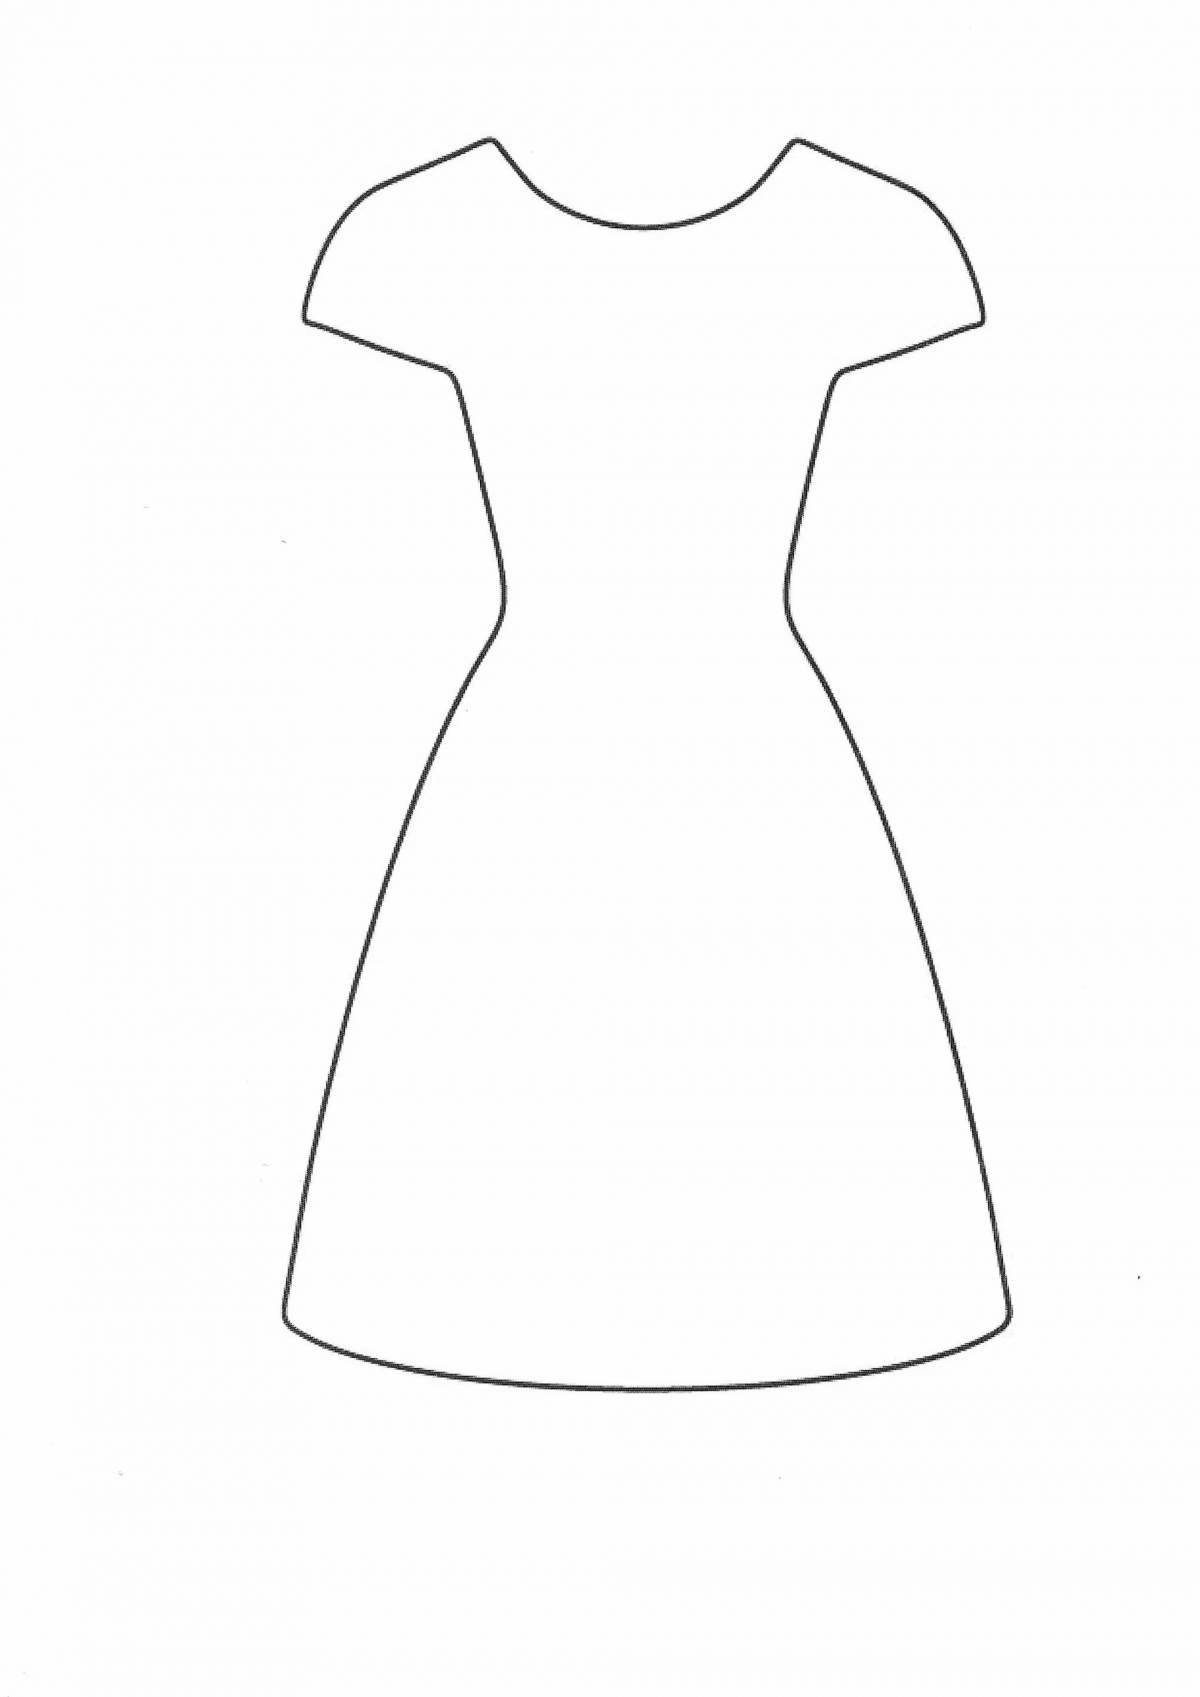 Exciting doll dress coloring page for 4-5 year olds